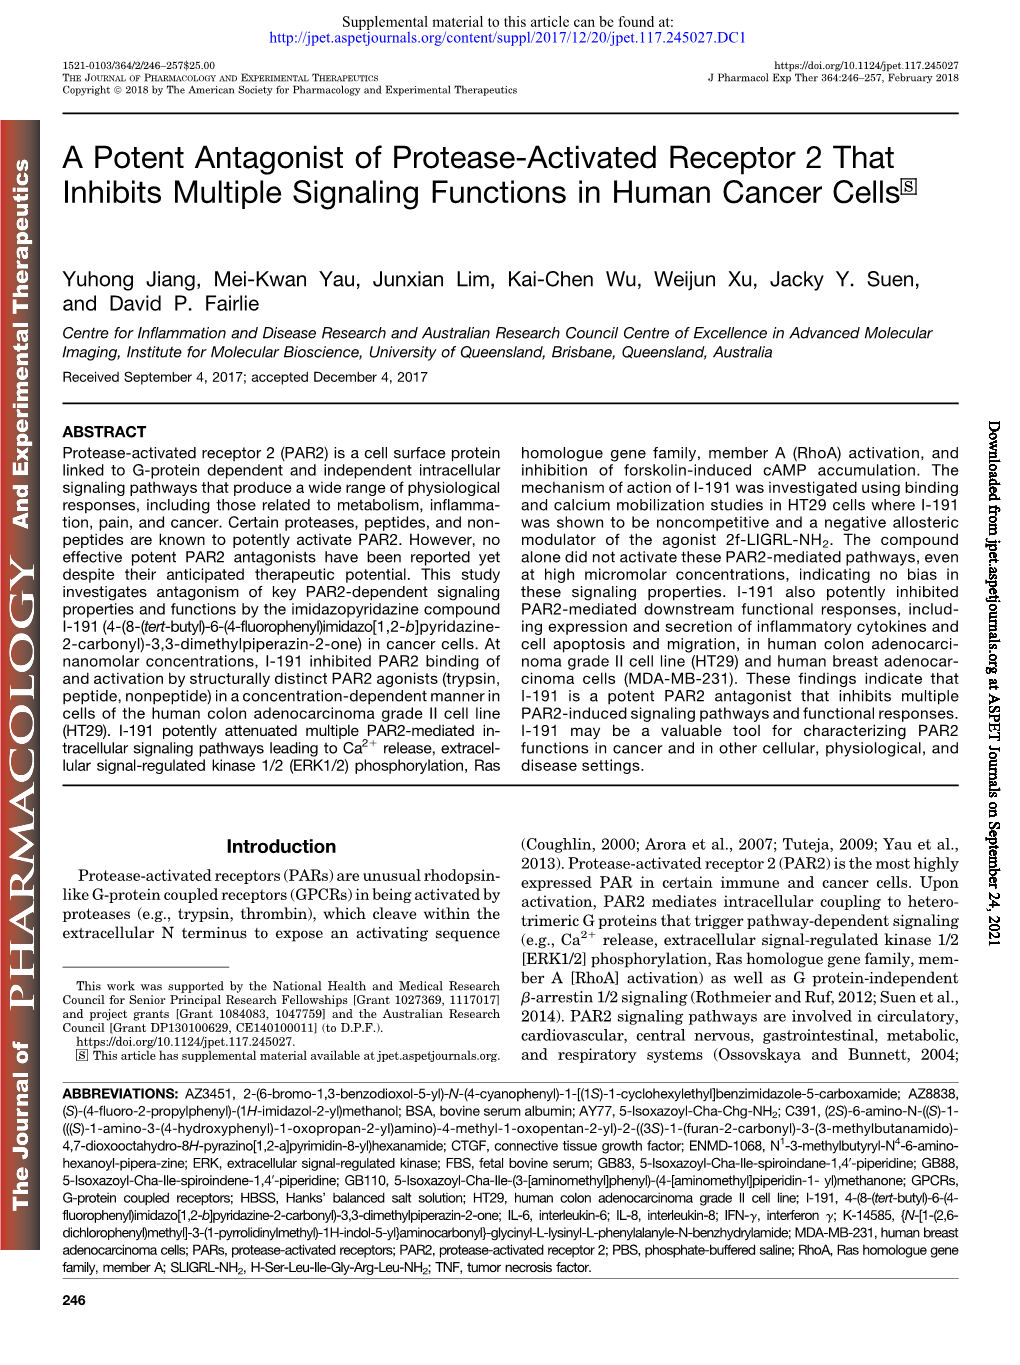 A Potent Antagonist of Protease-Activated Receptor 2 That Inhibits Multiple Signaling Functions in Human Cancer Cells S